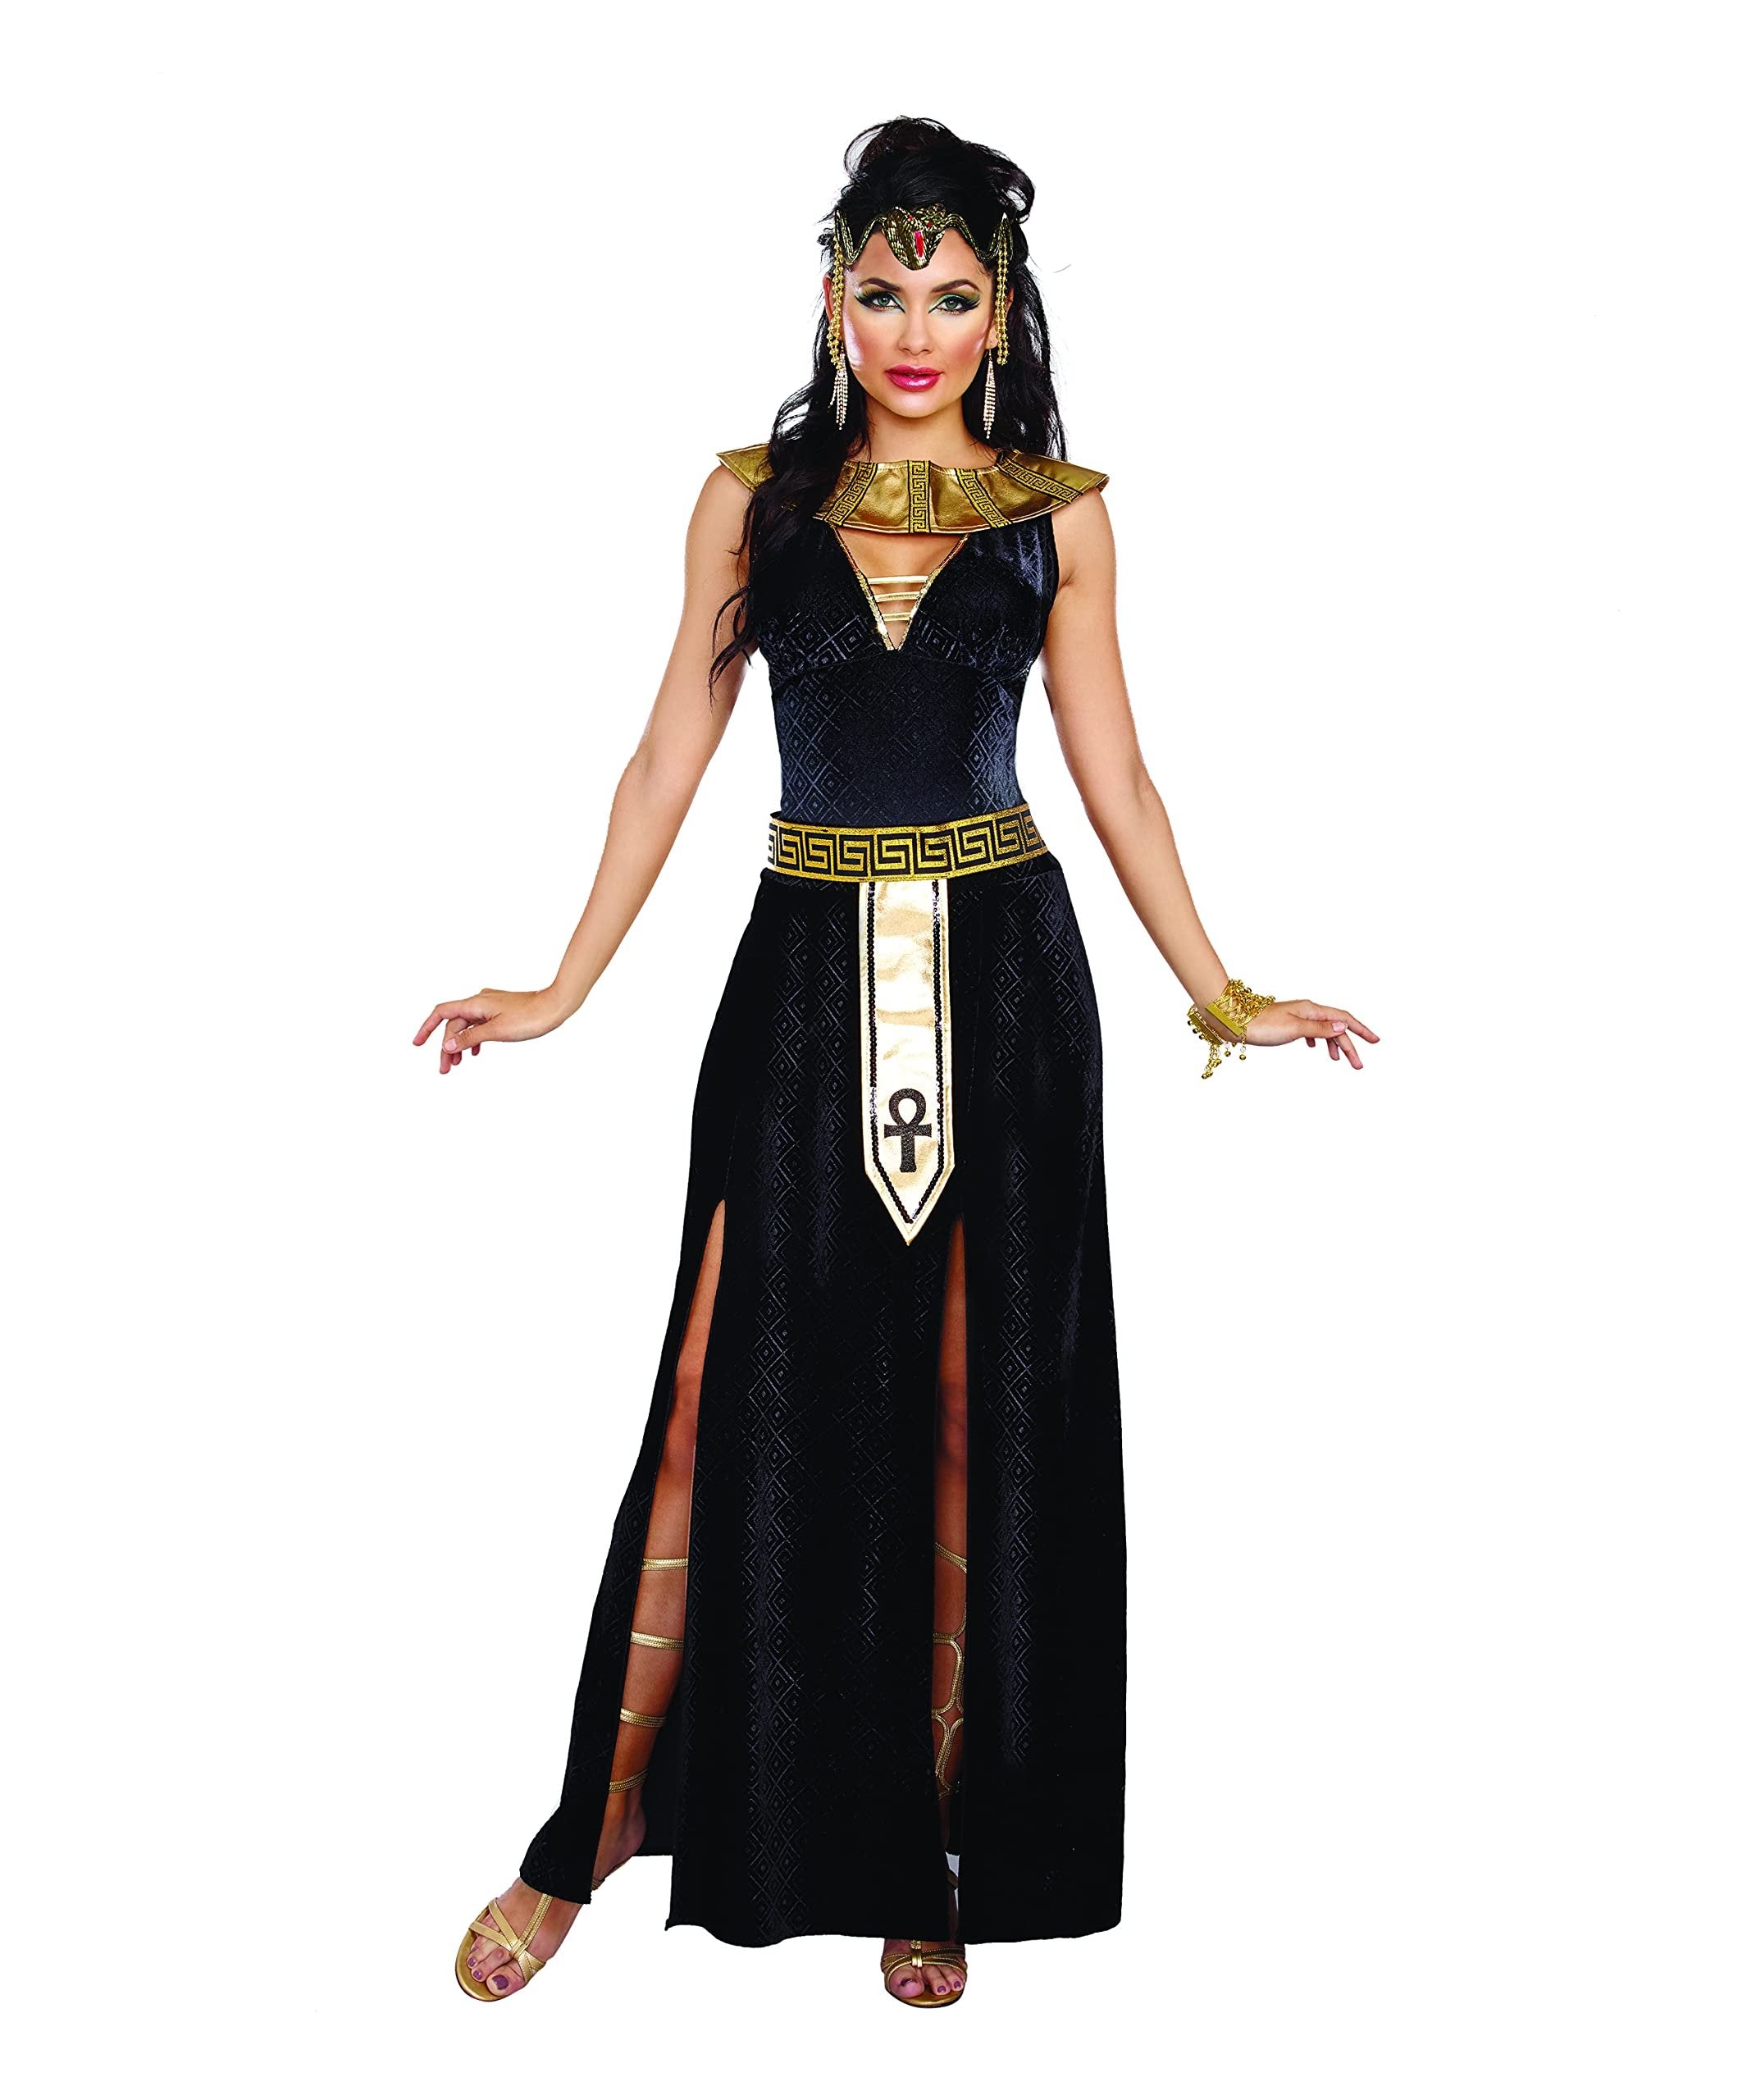 Dreamgirl Exquisite Cleopatra Costume Black/Gold XL - Free Shipping